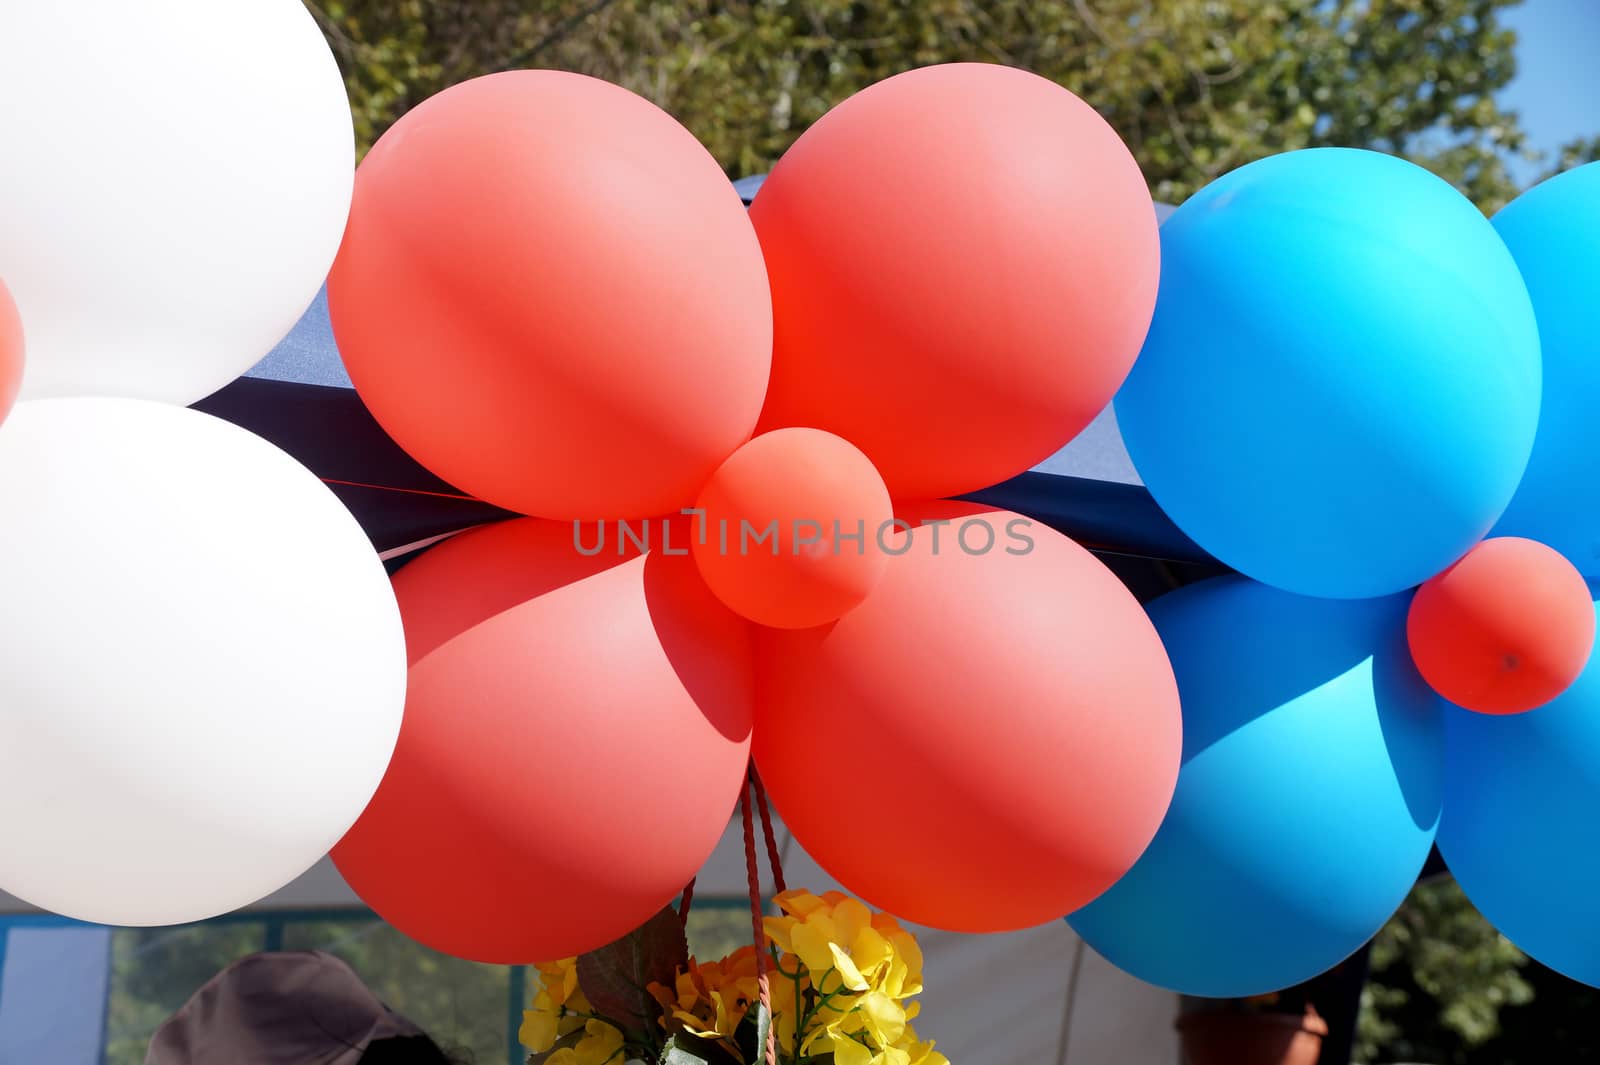 Big garland of multi-colored balloons in several colors